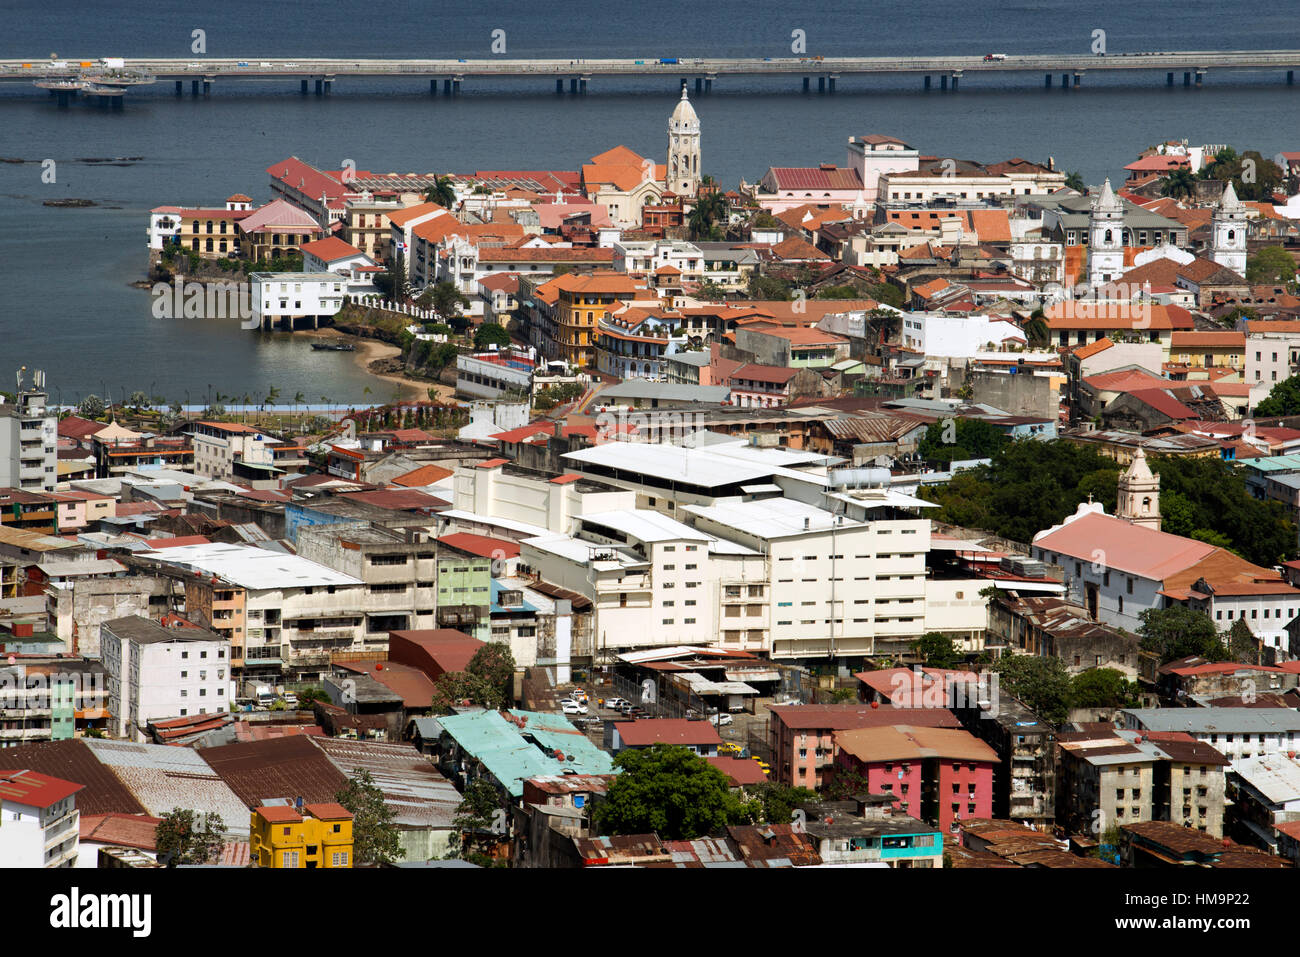 Panama City, Panama, Old part of town, Casco Viejo, seen from Ancon Hill. Casco Antiguo Historic Town Panama City Central America old town houses. Cas Stock Photo